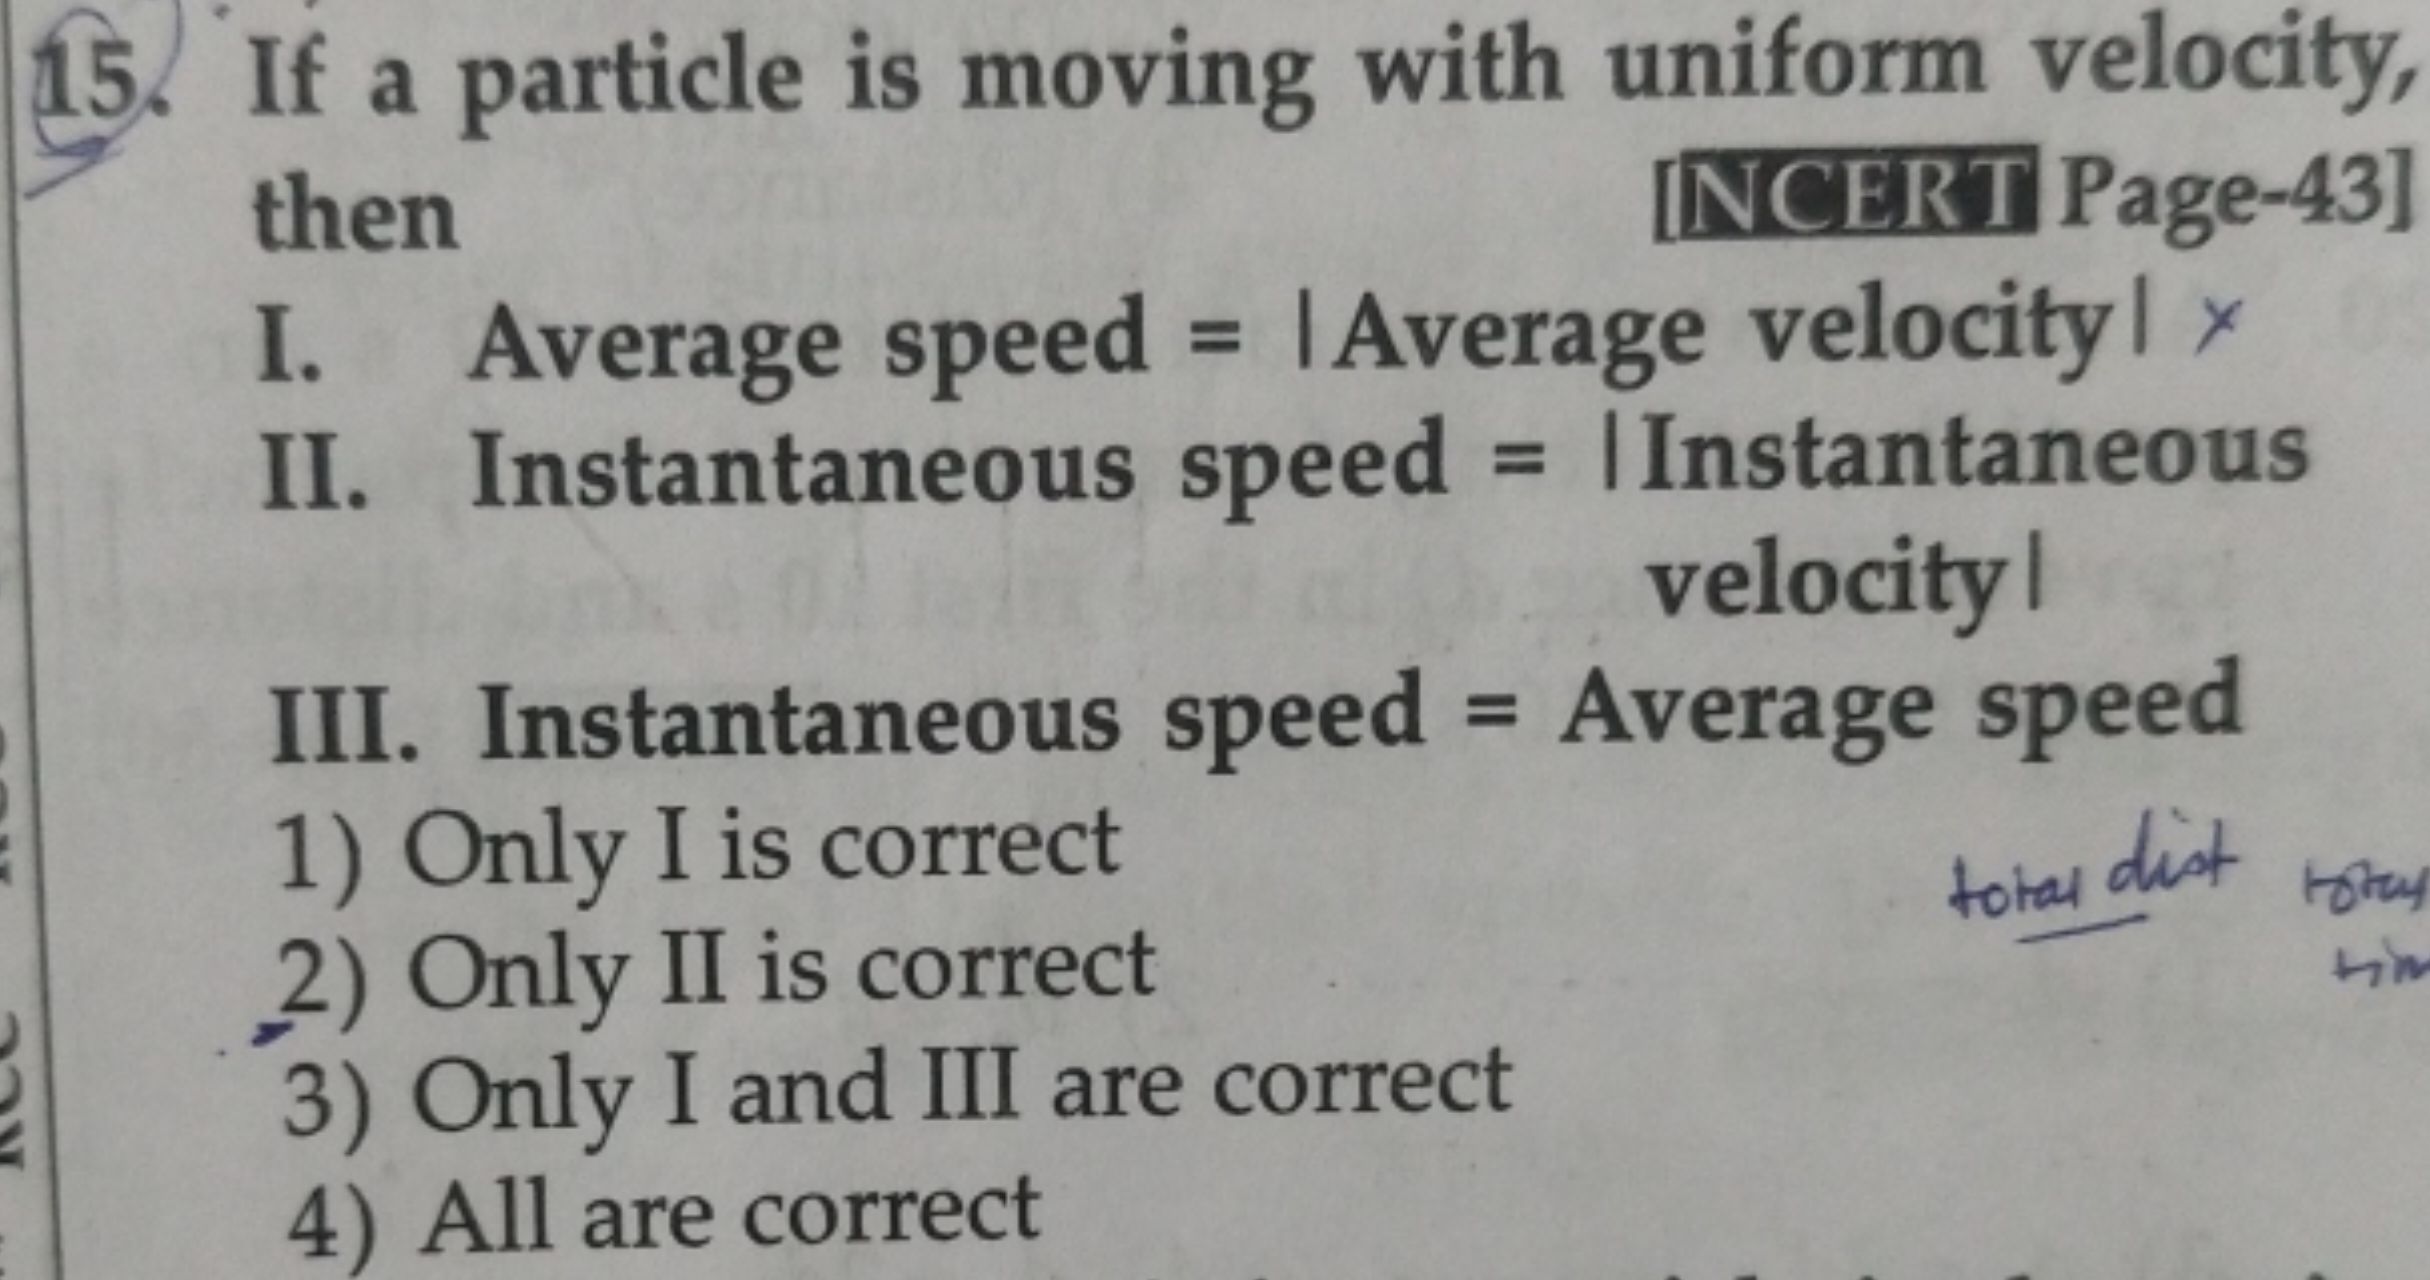 If a particle is moving with uniform velocity, then [NCERT Page-43] I.